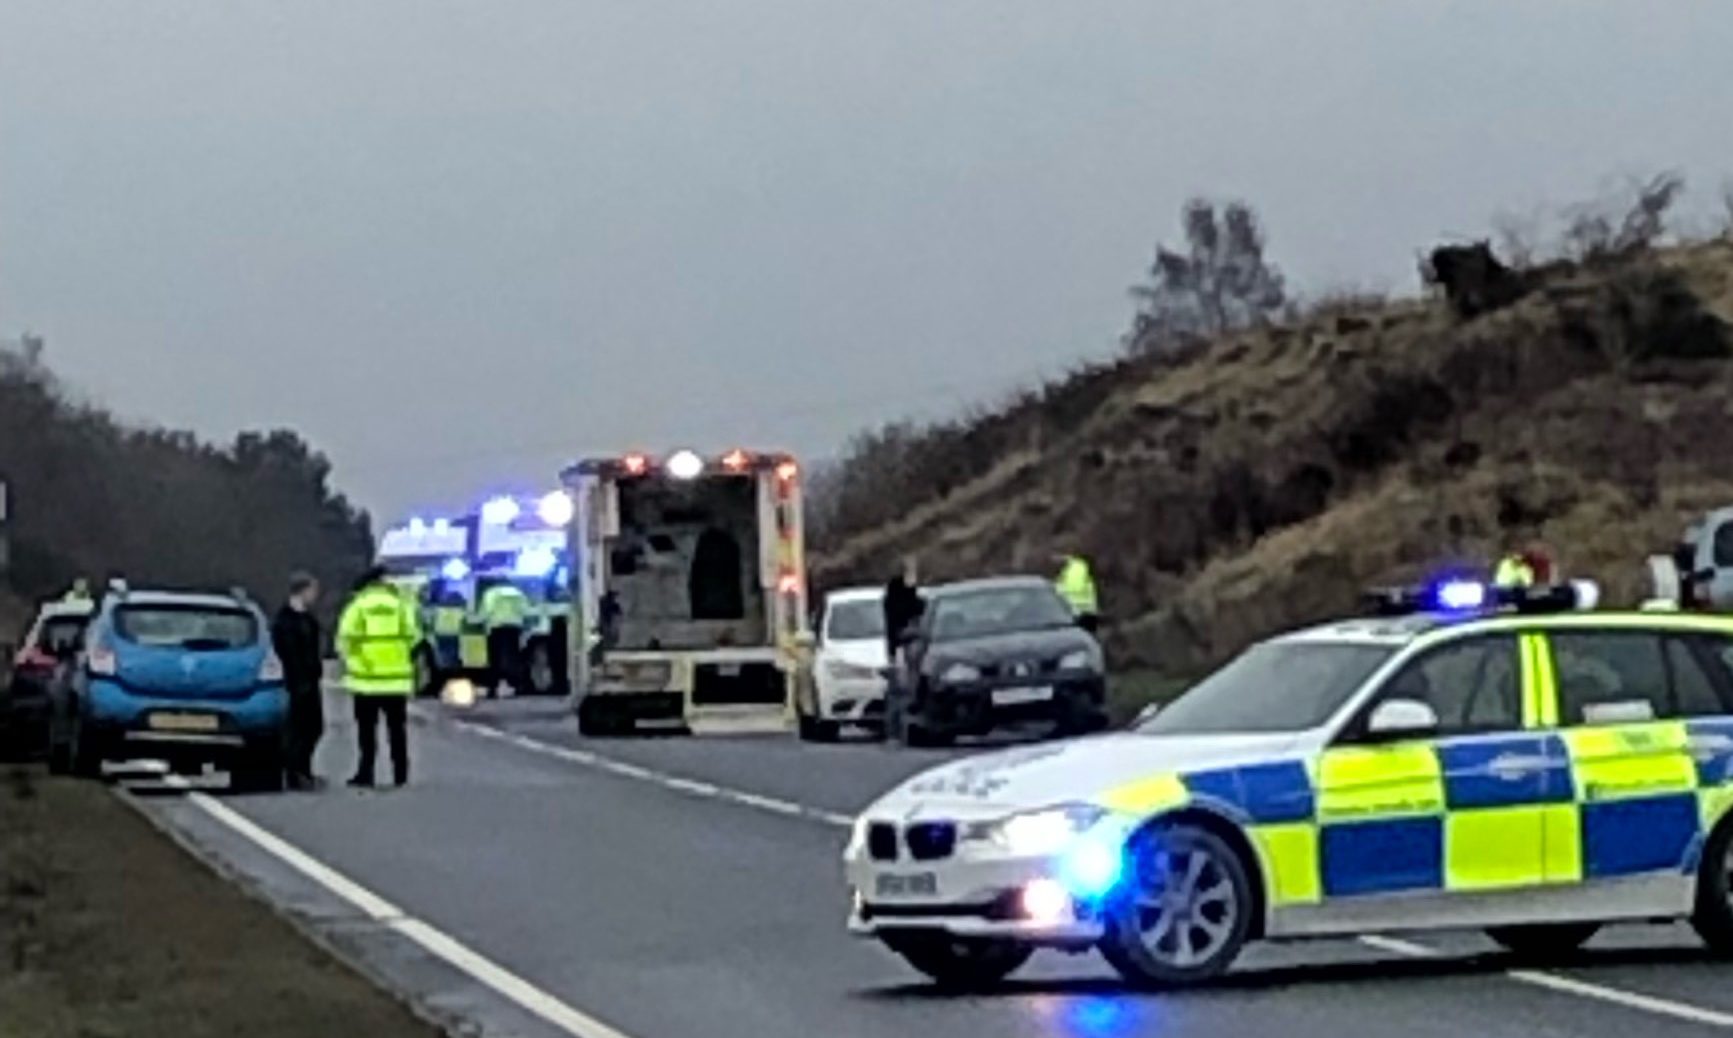 The scene of the fatal crash on the A9 near Luncarty.